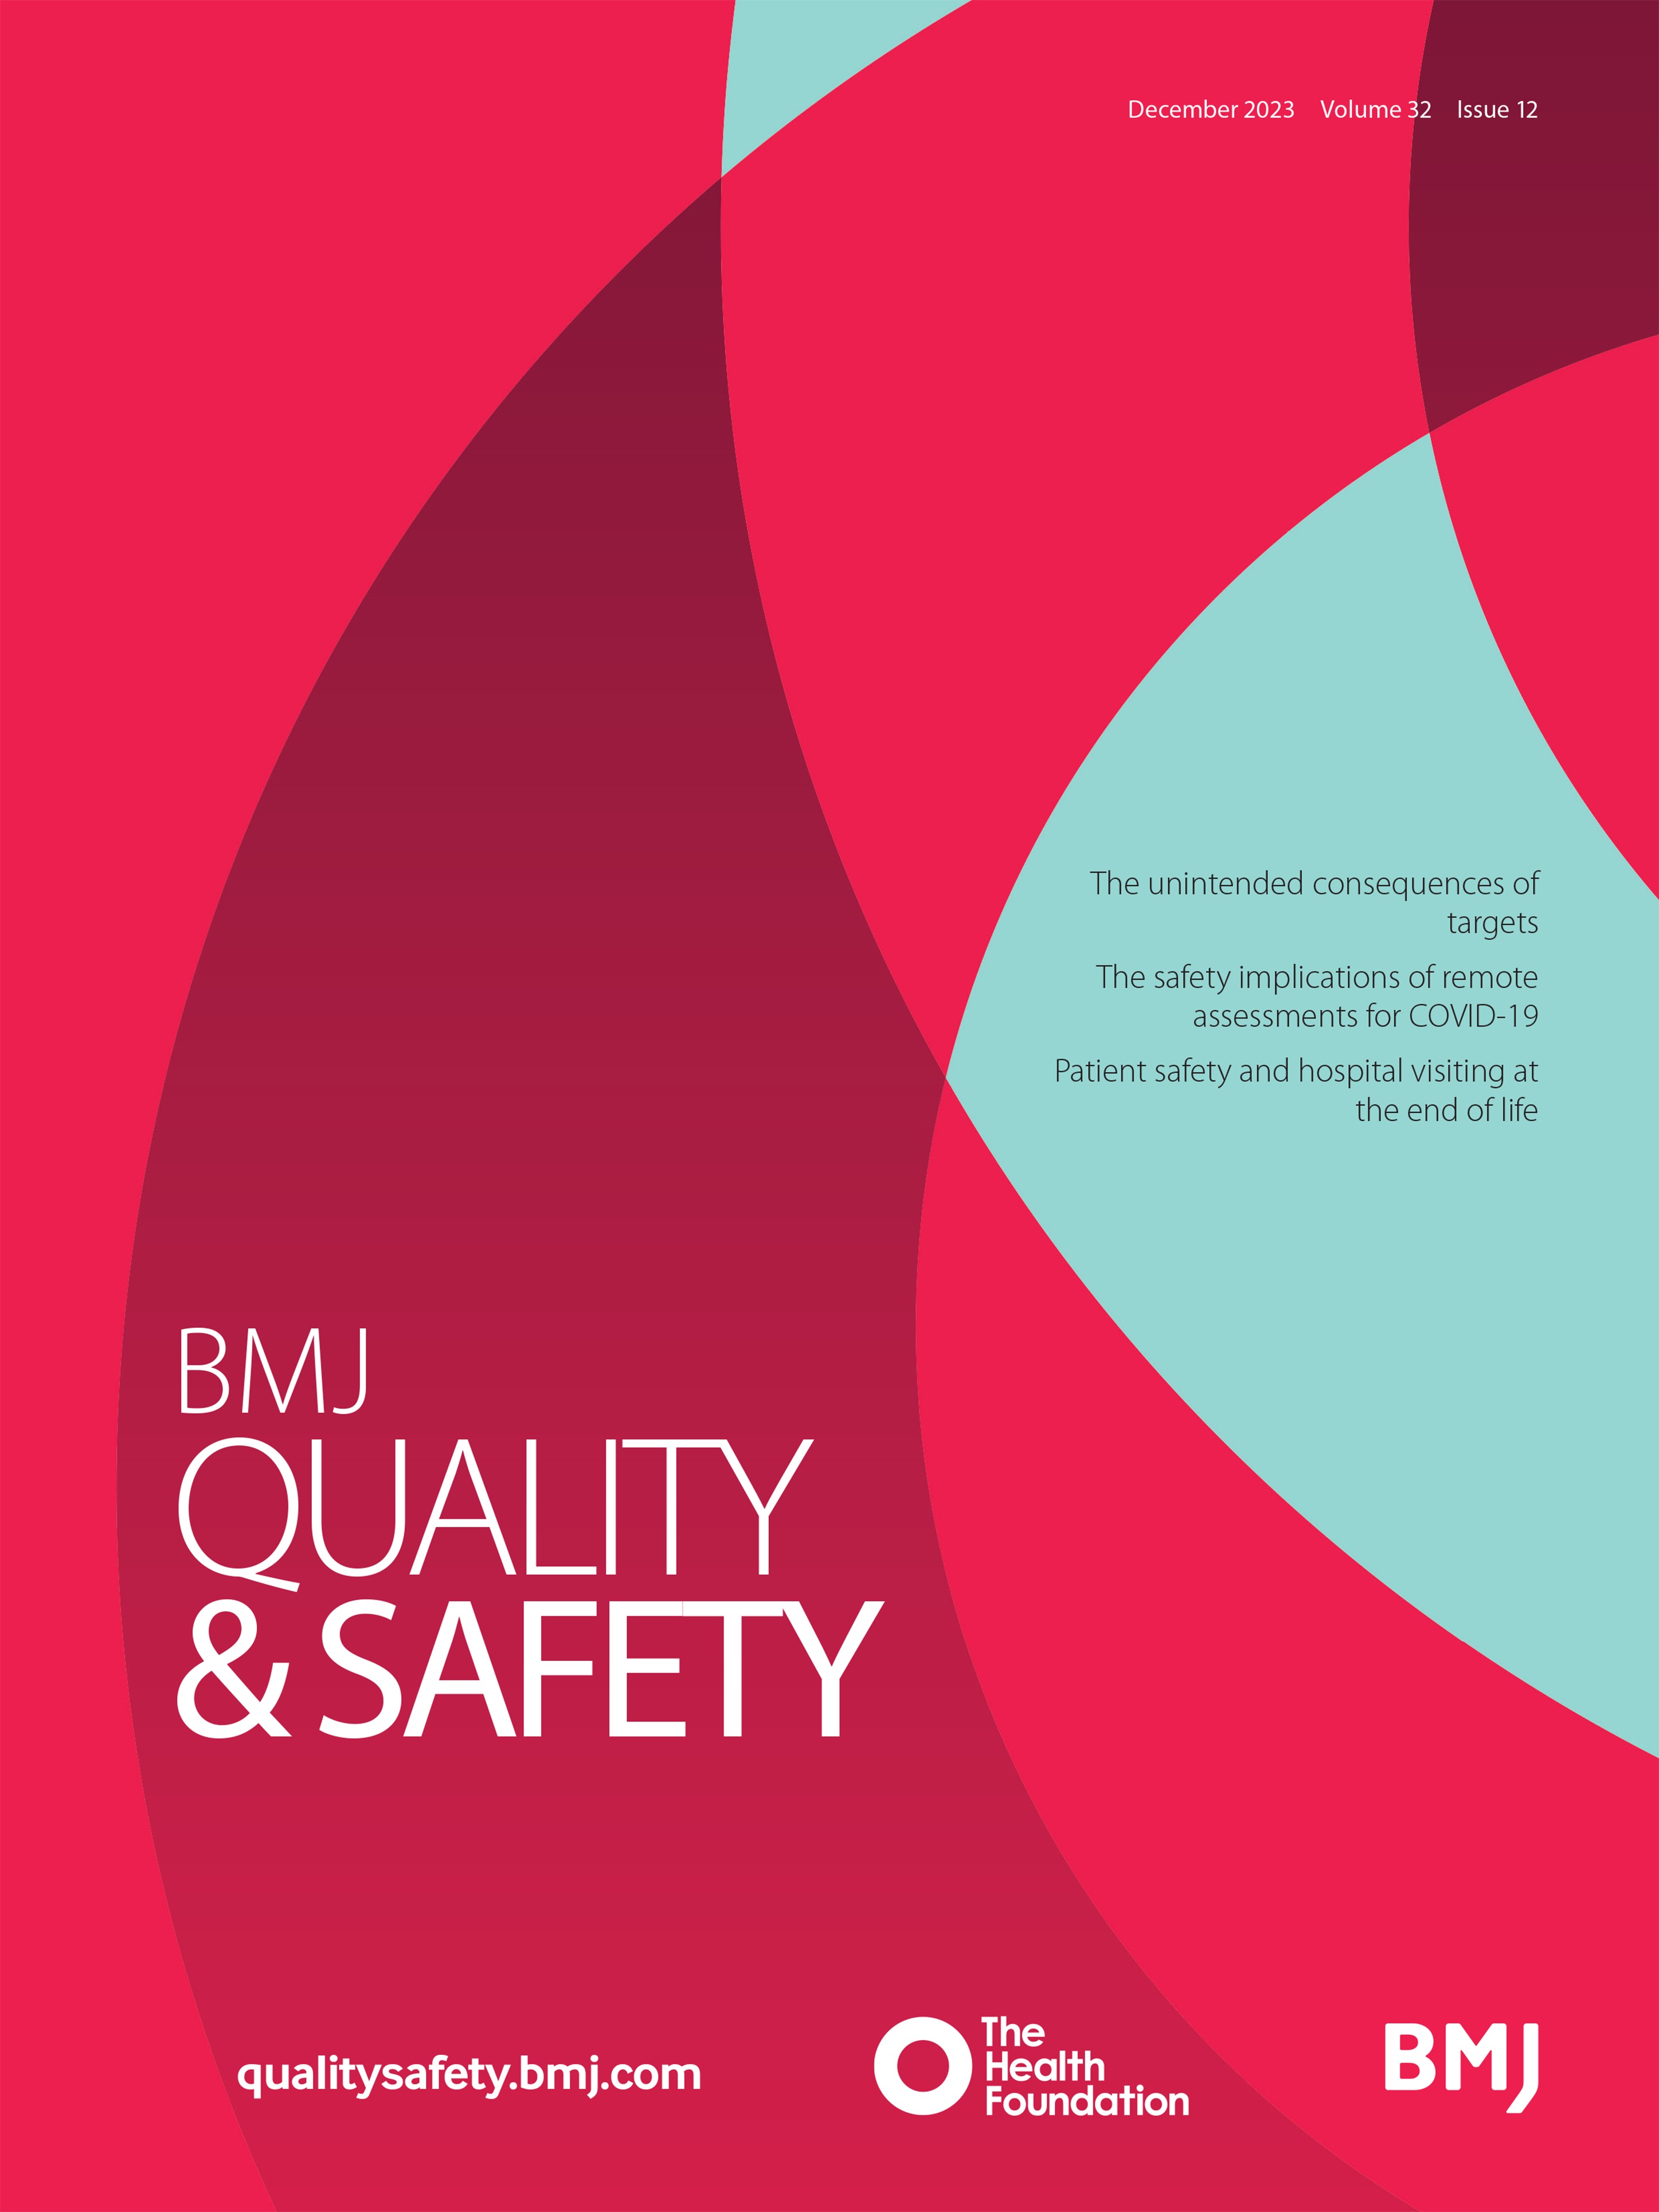 Patient safety and hospital visiting at the end of life during COVID-19 restrictions in Aotearoa New Zealand: a qualitative study